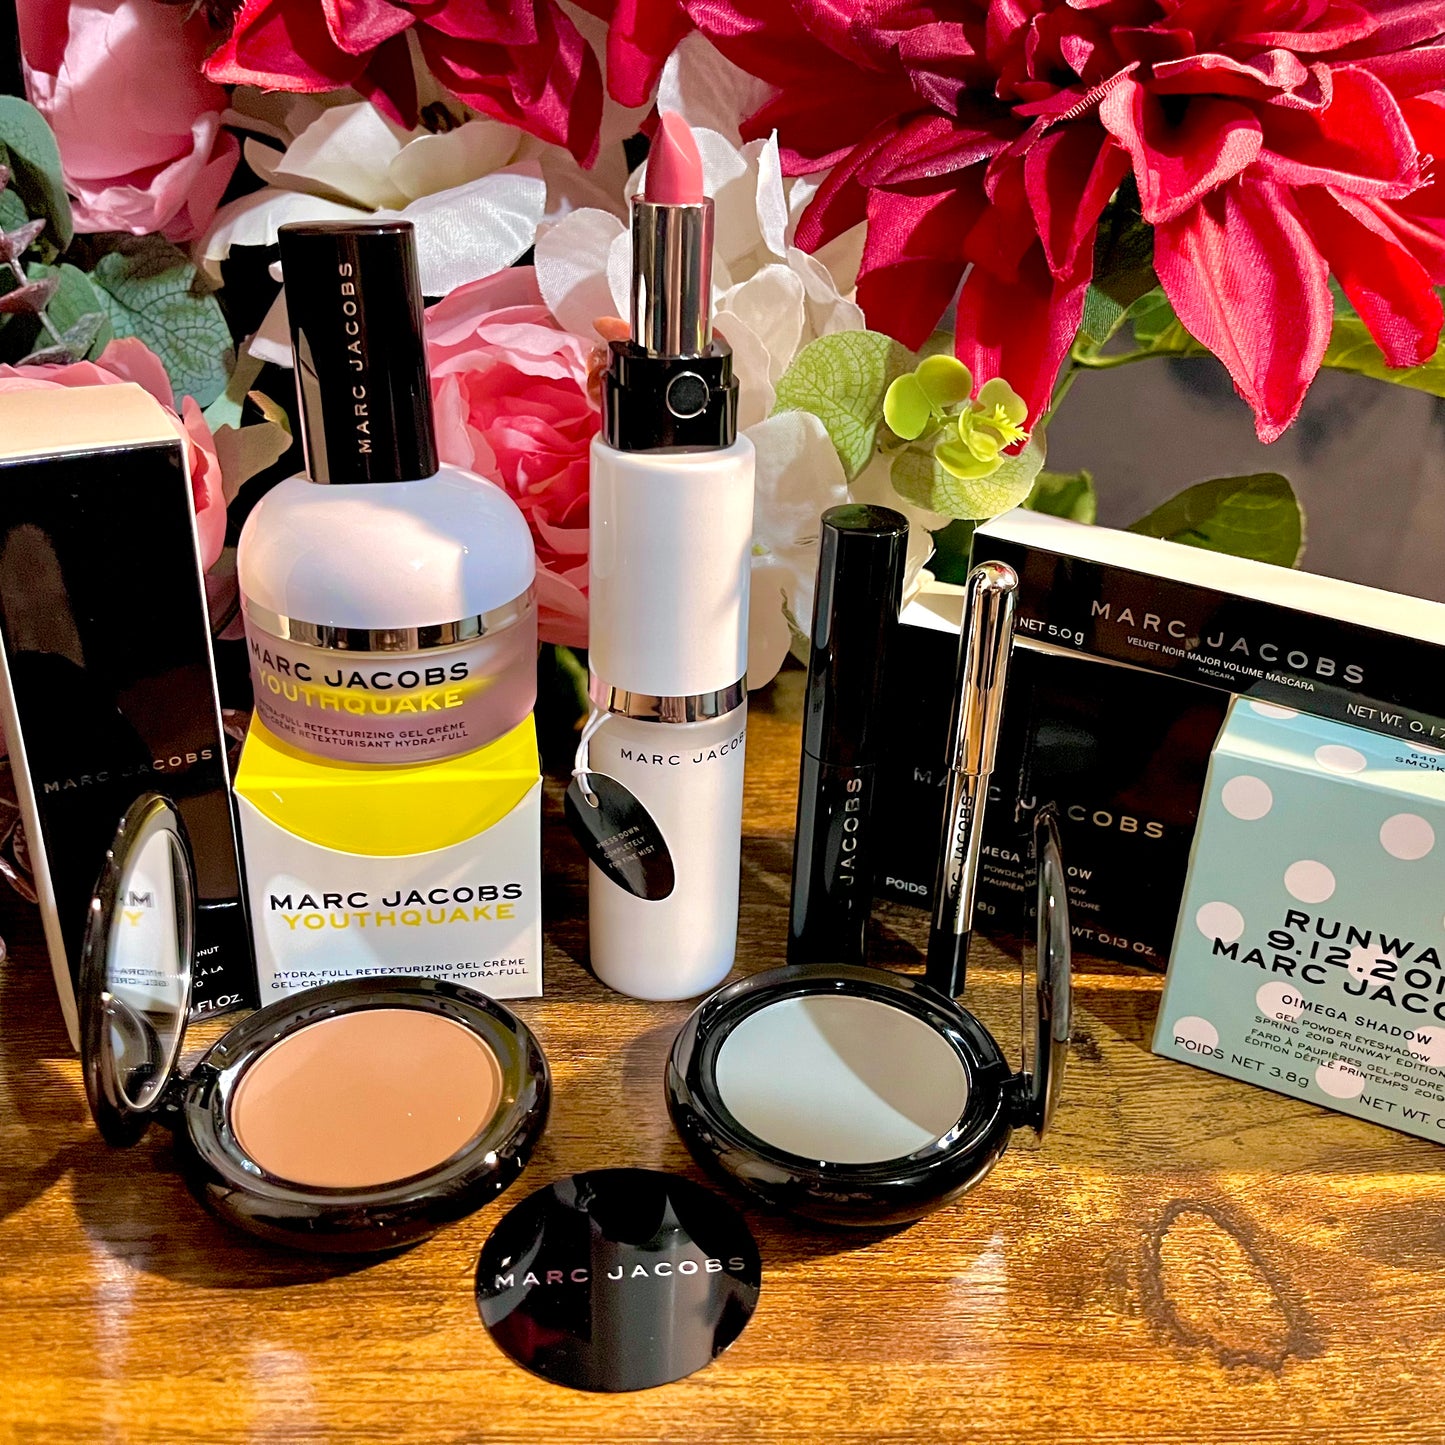 Elegant Marc Jacobs beauty collection featuring glossy compact powders, signature coconut setting spray, and assorted beauty cosmetics, complemented by a backdrop of lush pink & white florals.